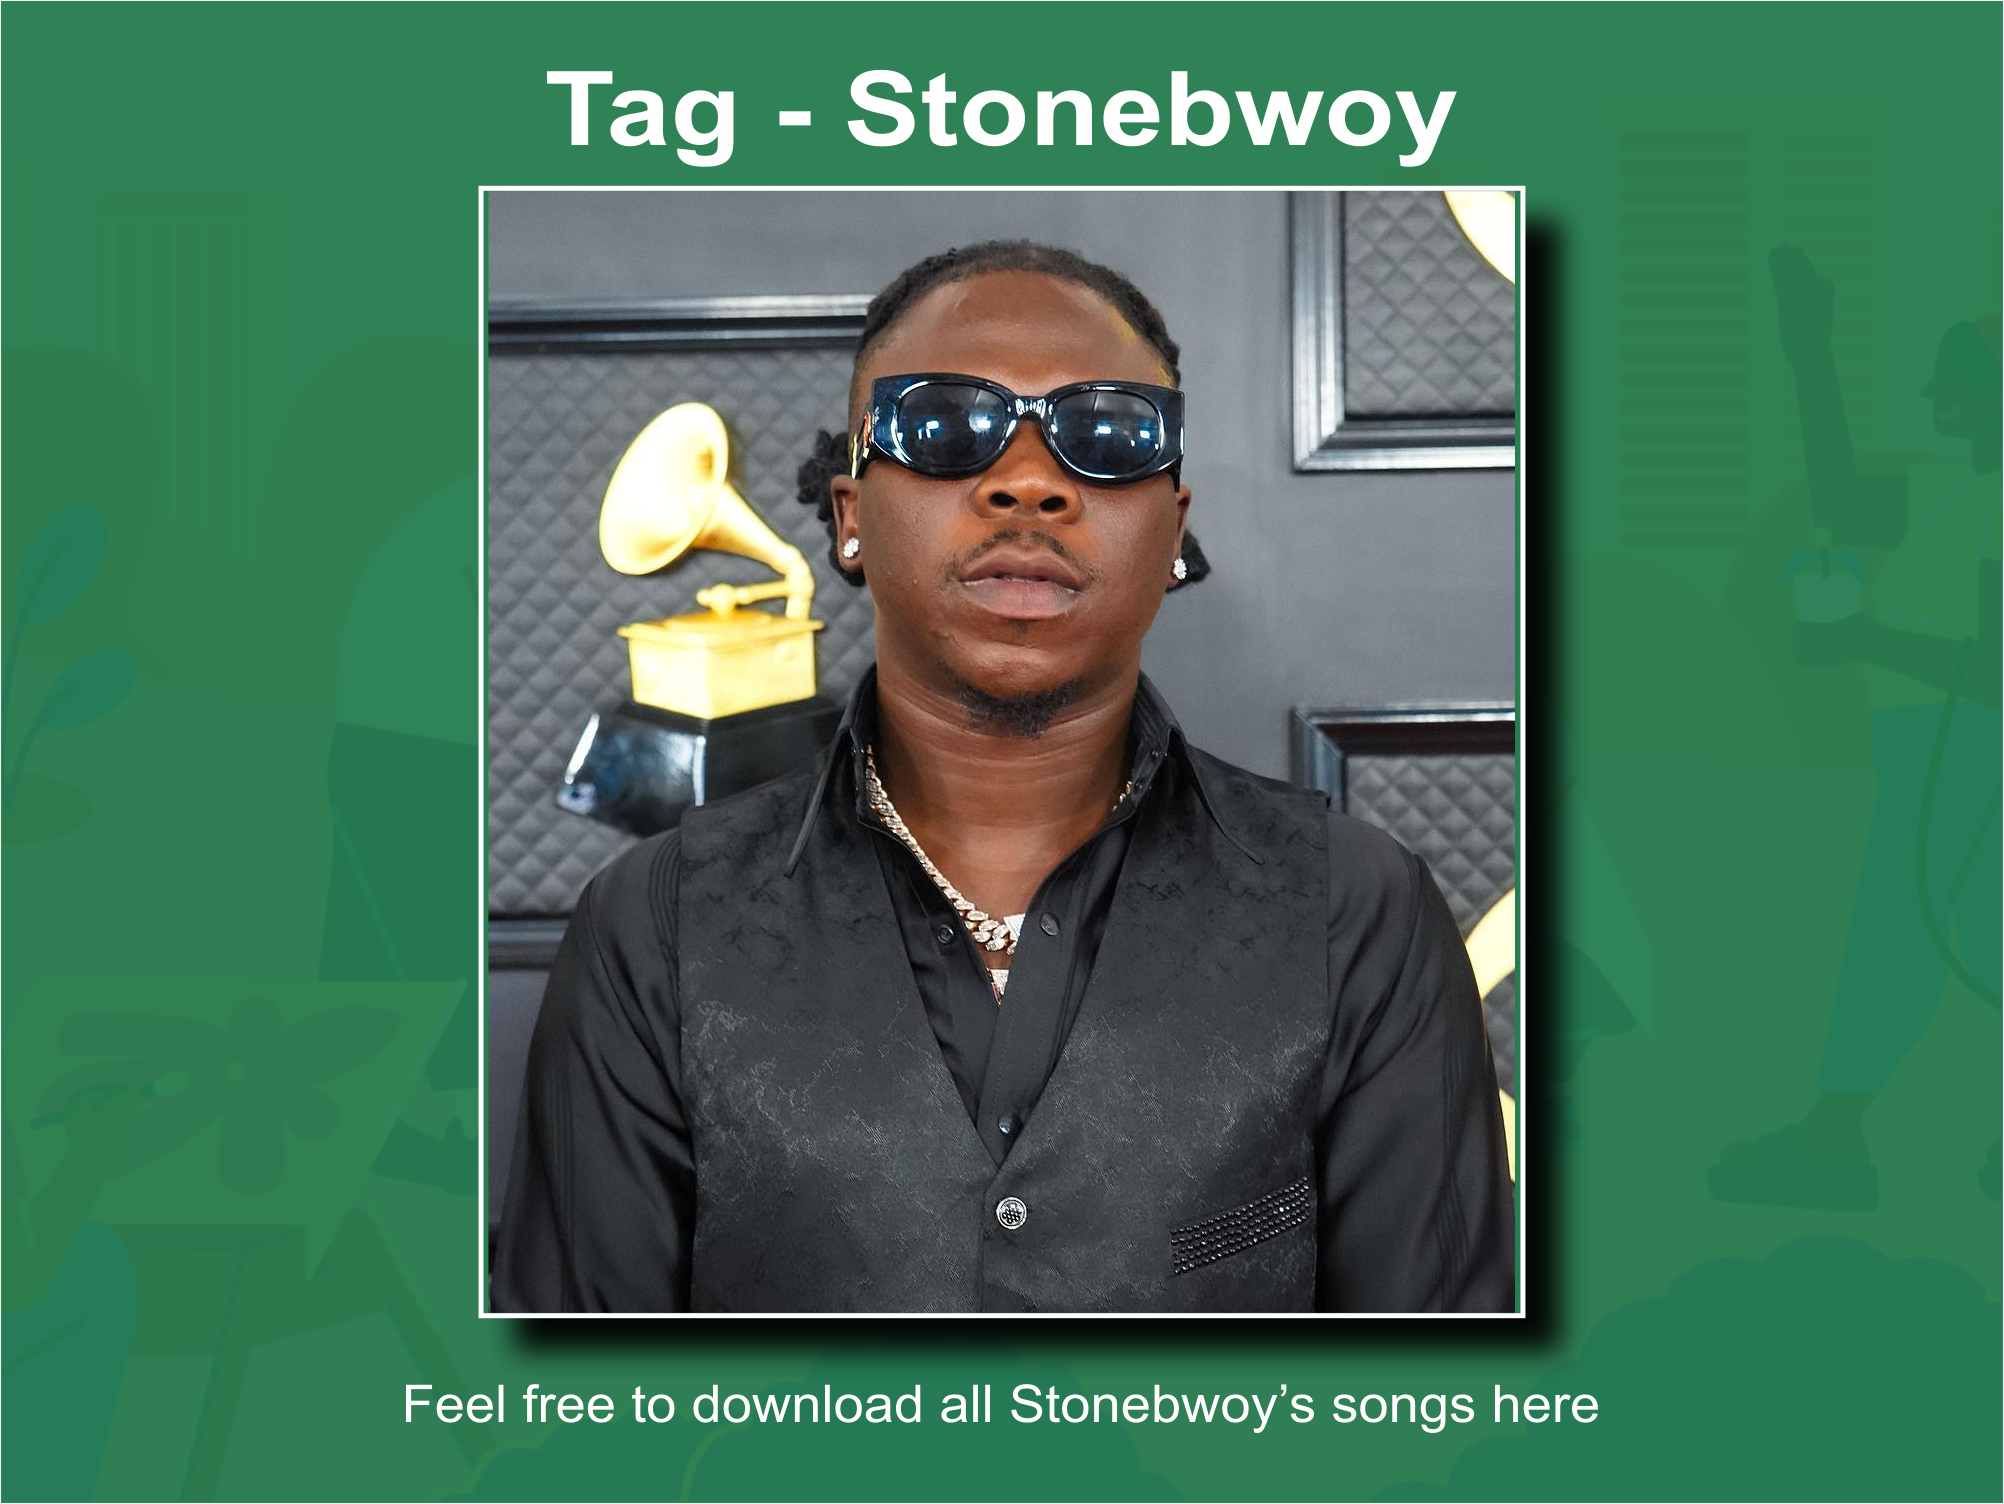 Download all Stonebwoy songs here for free